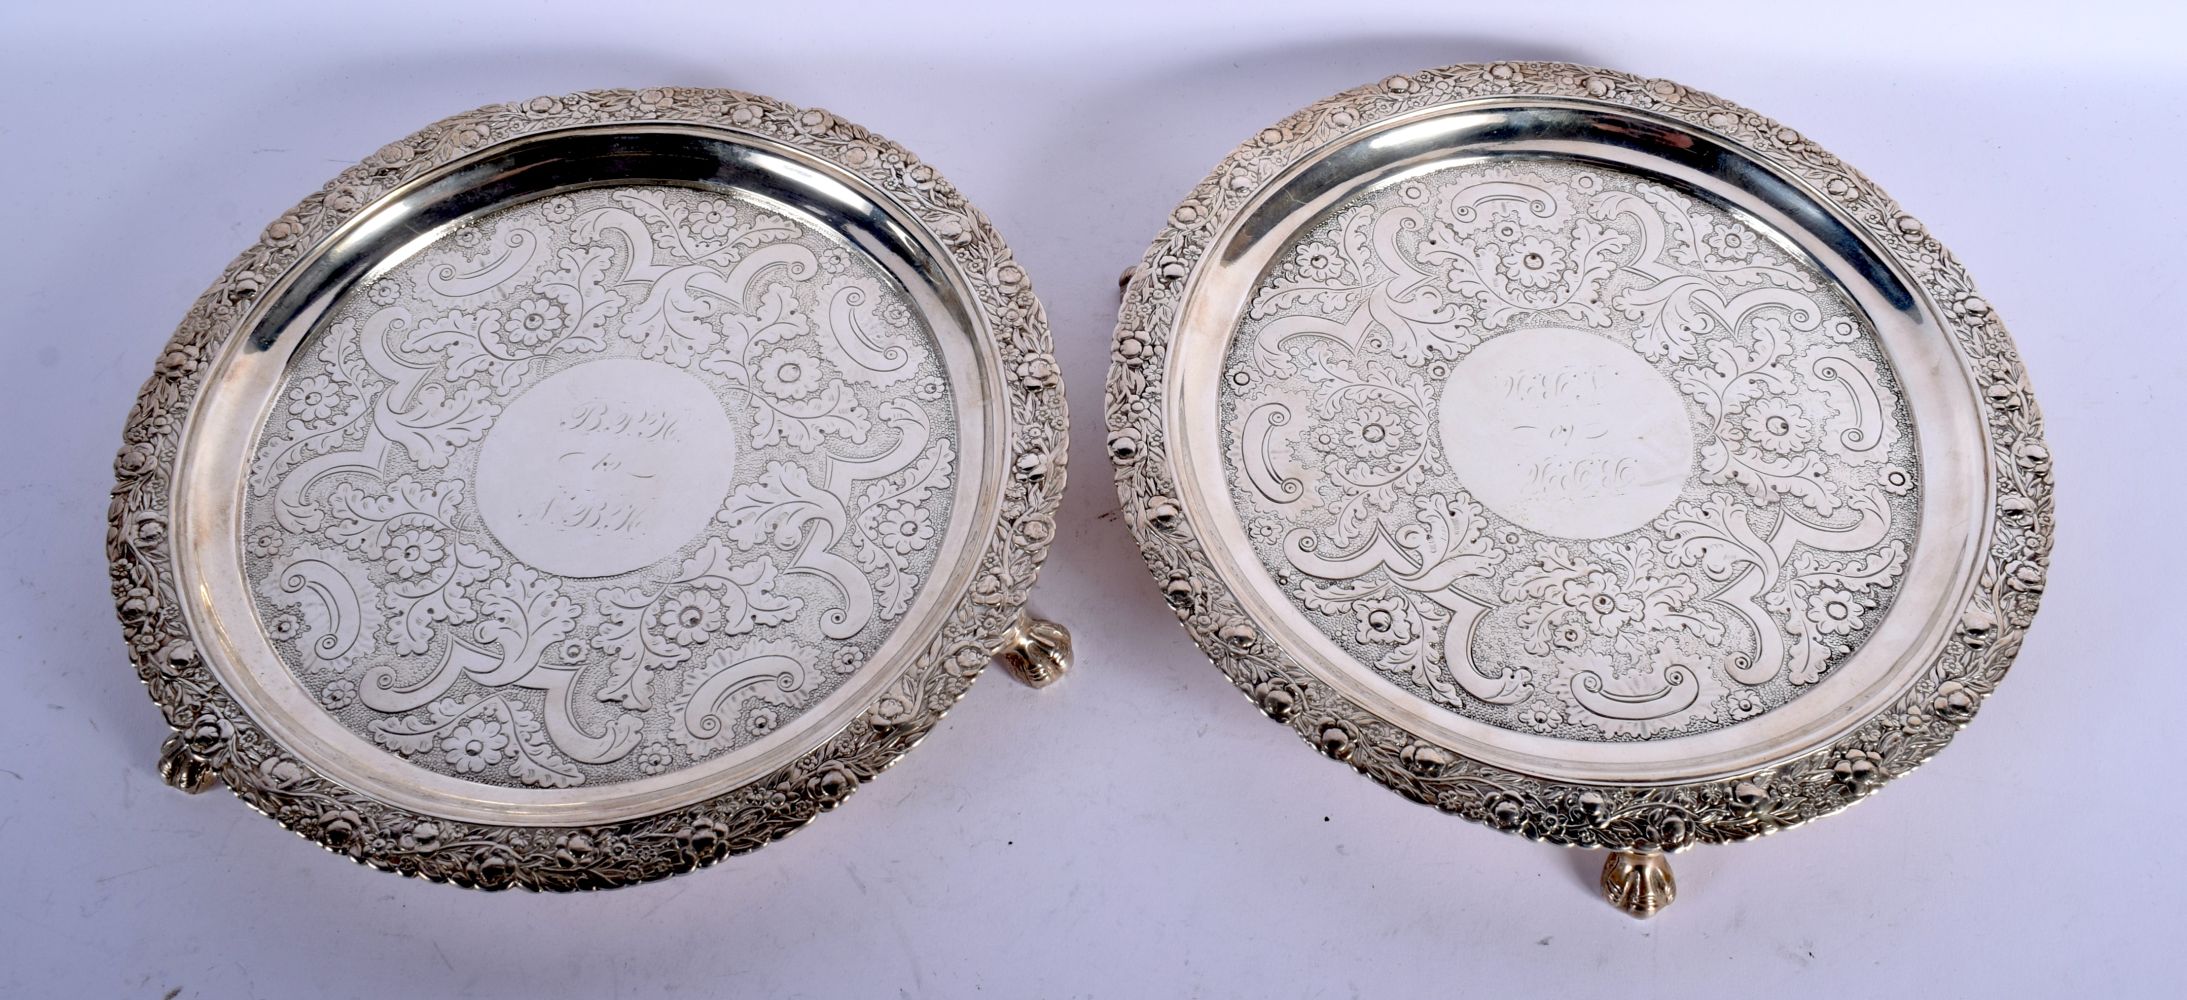 A PAIR OF 19TH CENTURY CONTINENTAL SILVER SALVES by Welles Celston & Co. 1144 grams. 24 cm wide.